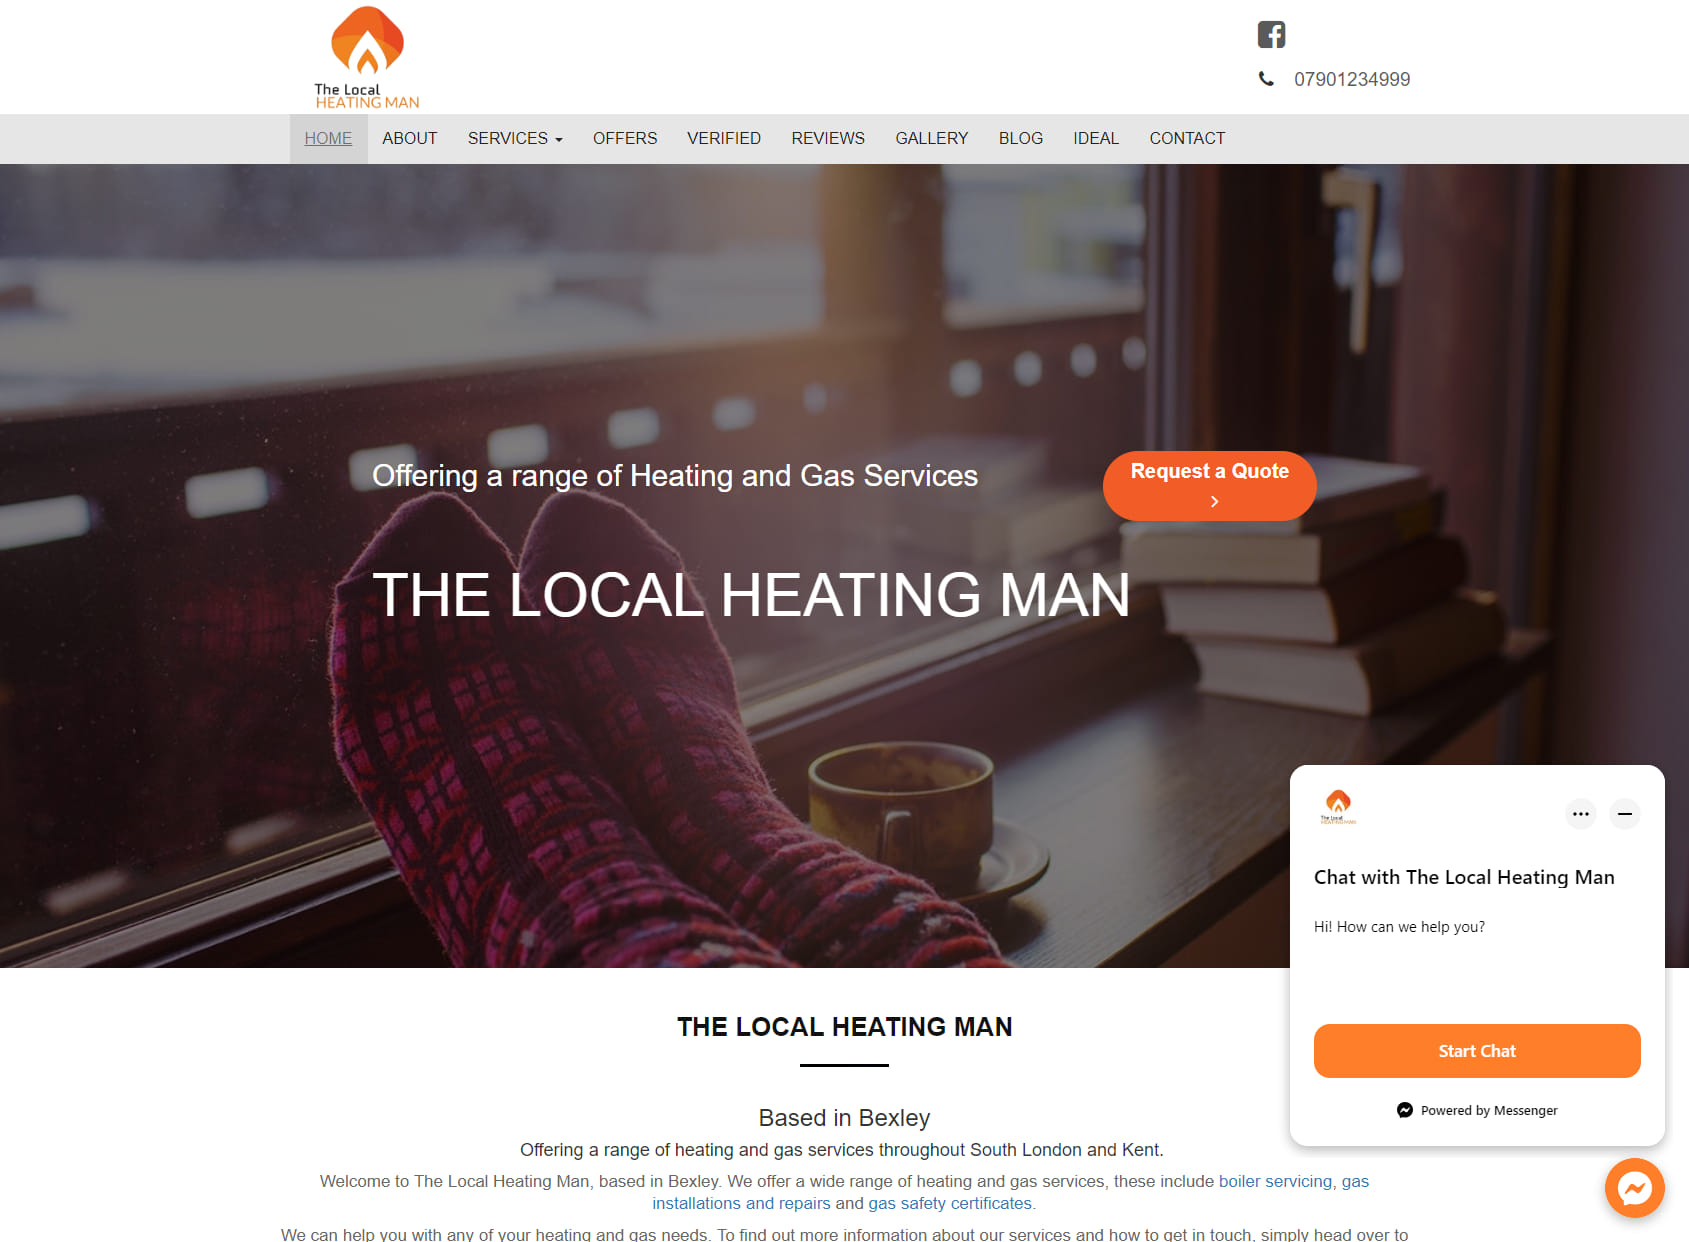 The Local Heating Man